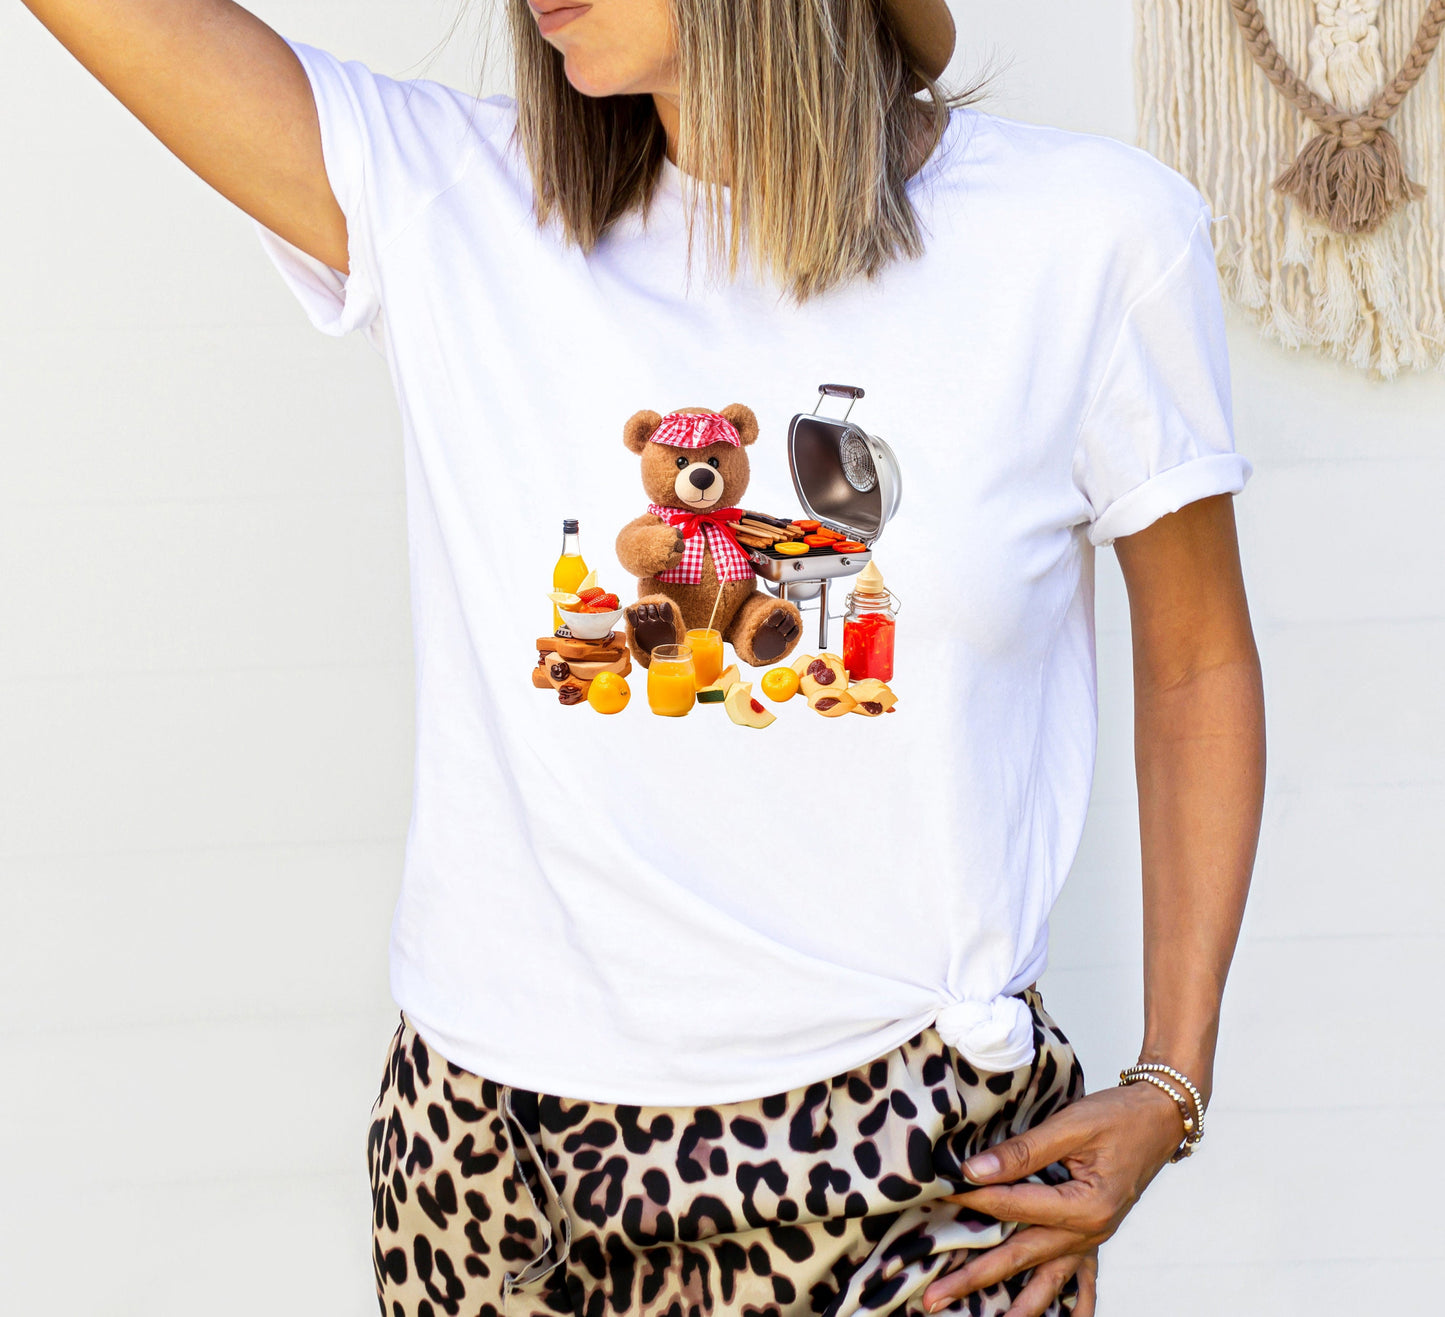 Bears, Burgers, and BBQ: Sublimation Design for Grillin' Fun